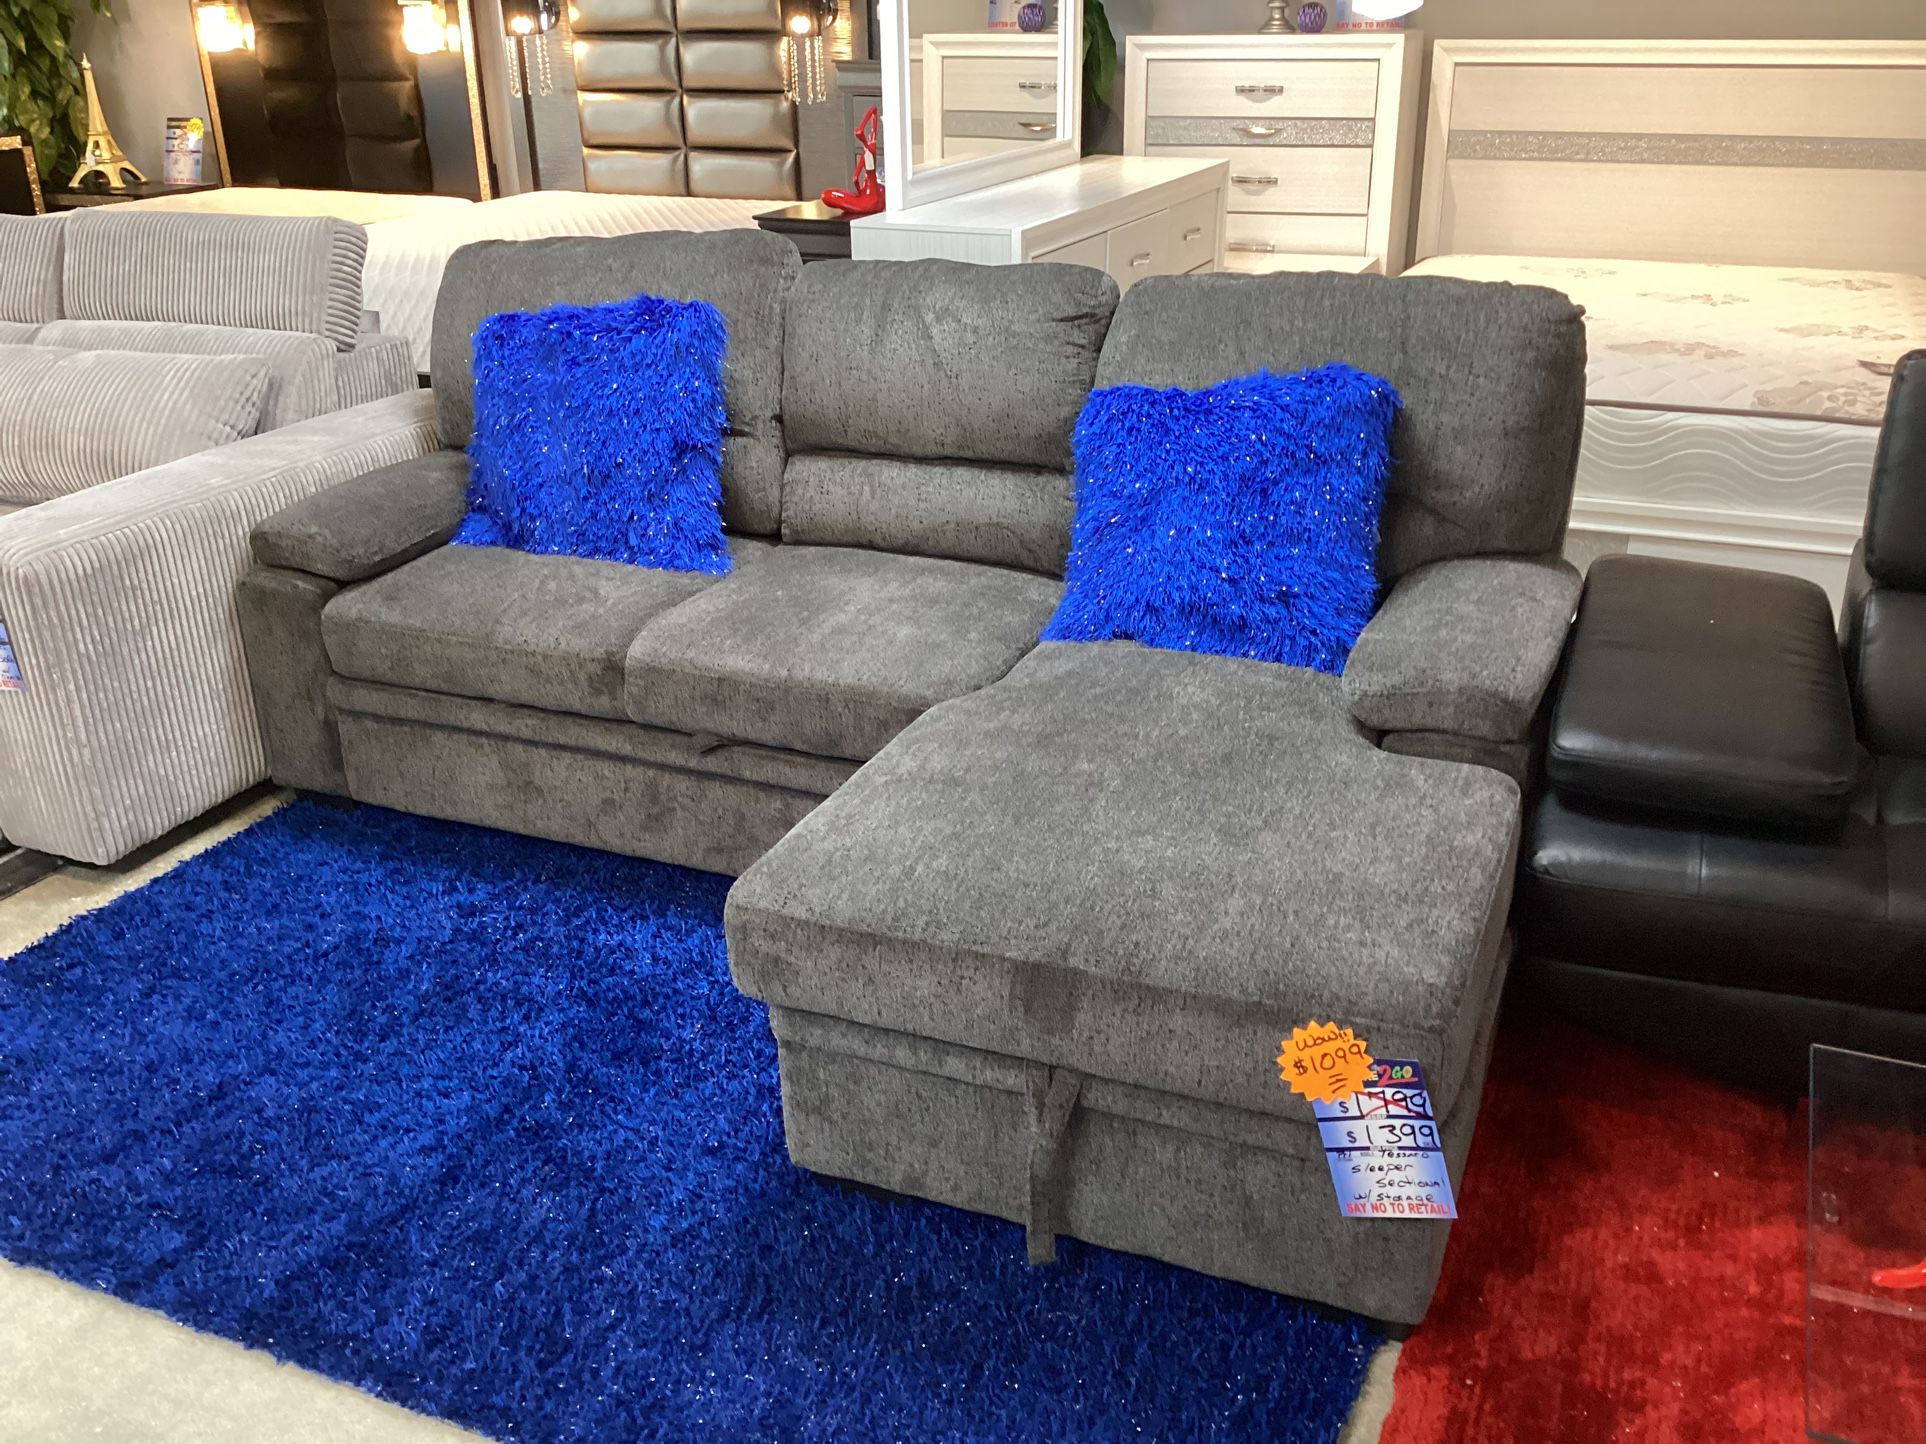 Beautiful Furniture Sofa Bed With Storage On Sale Now For $799 Color Light Gray And Dark Gray Are Available!